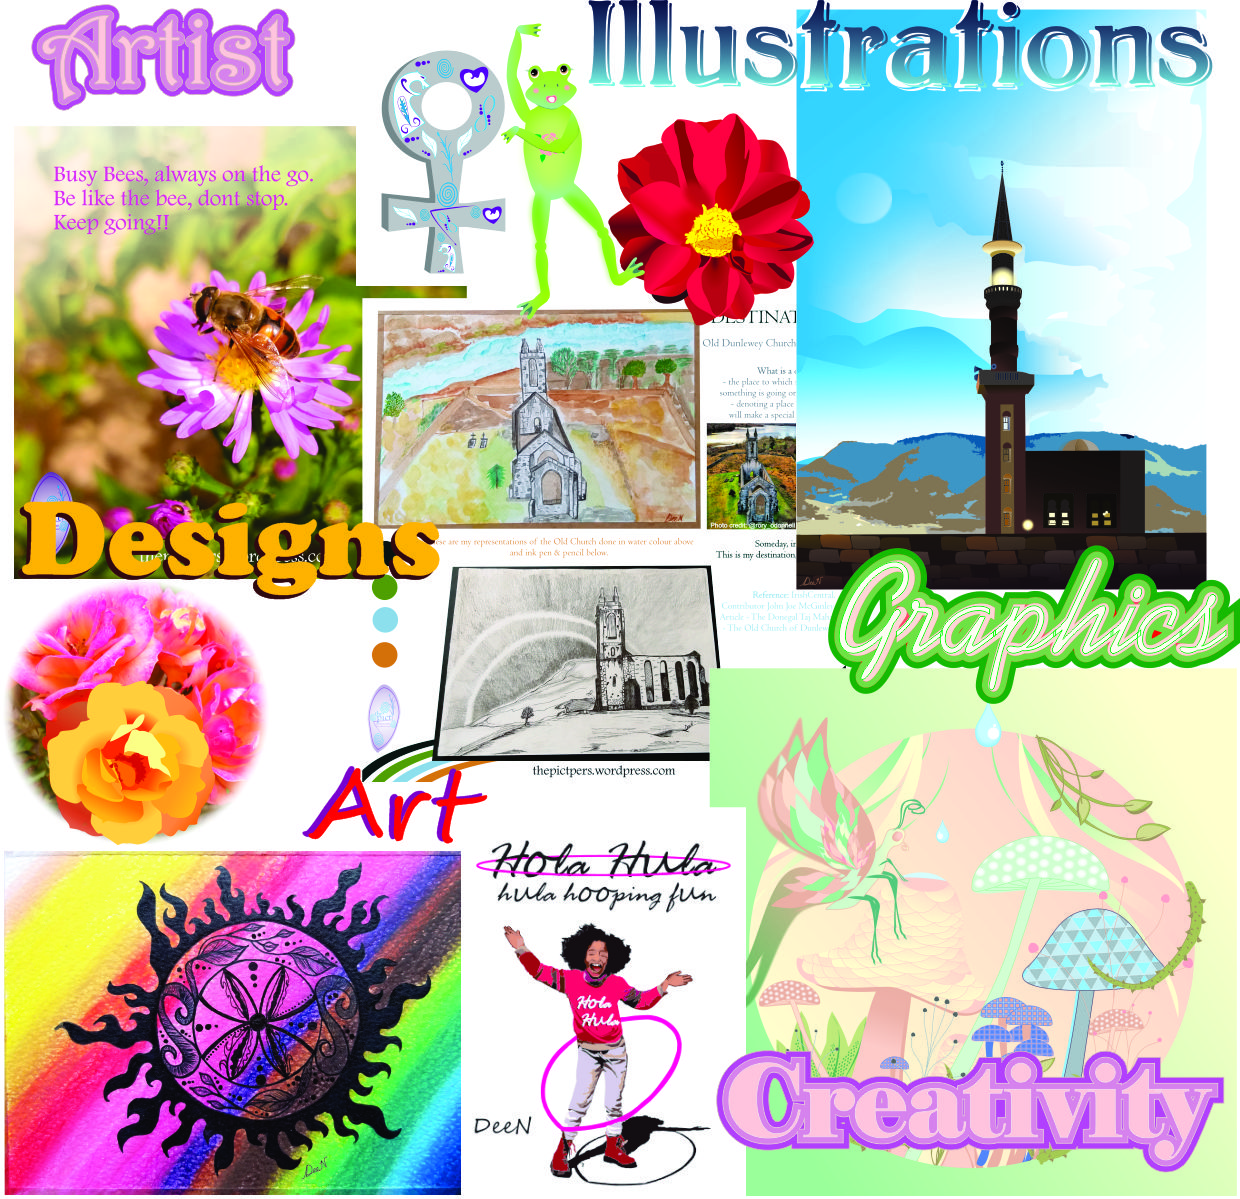 A few of our design works, graphics, social media posts, drawings & art